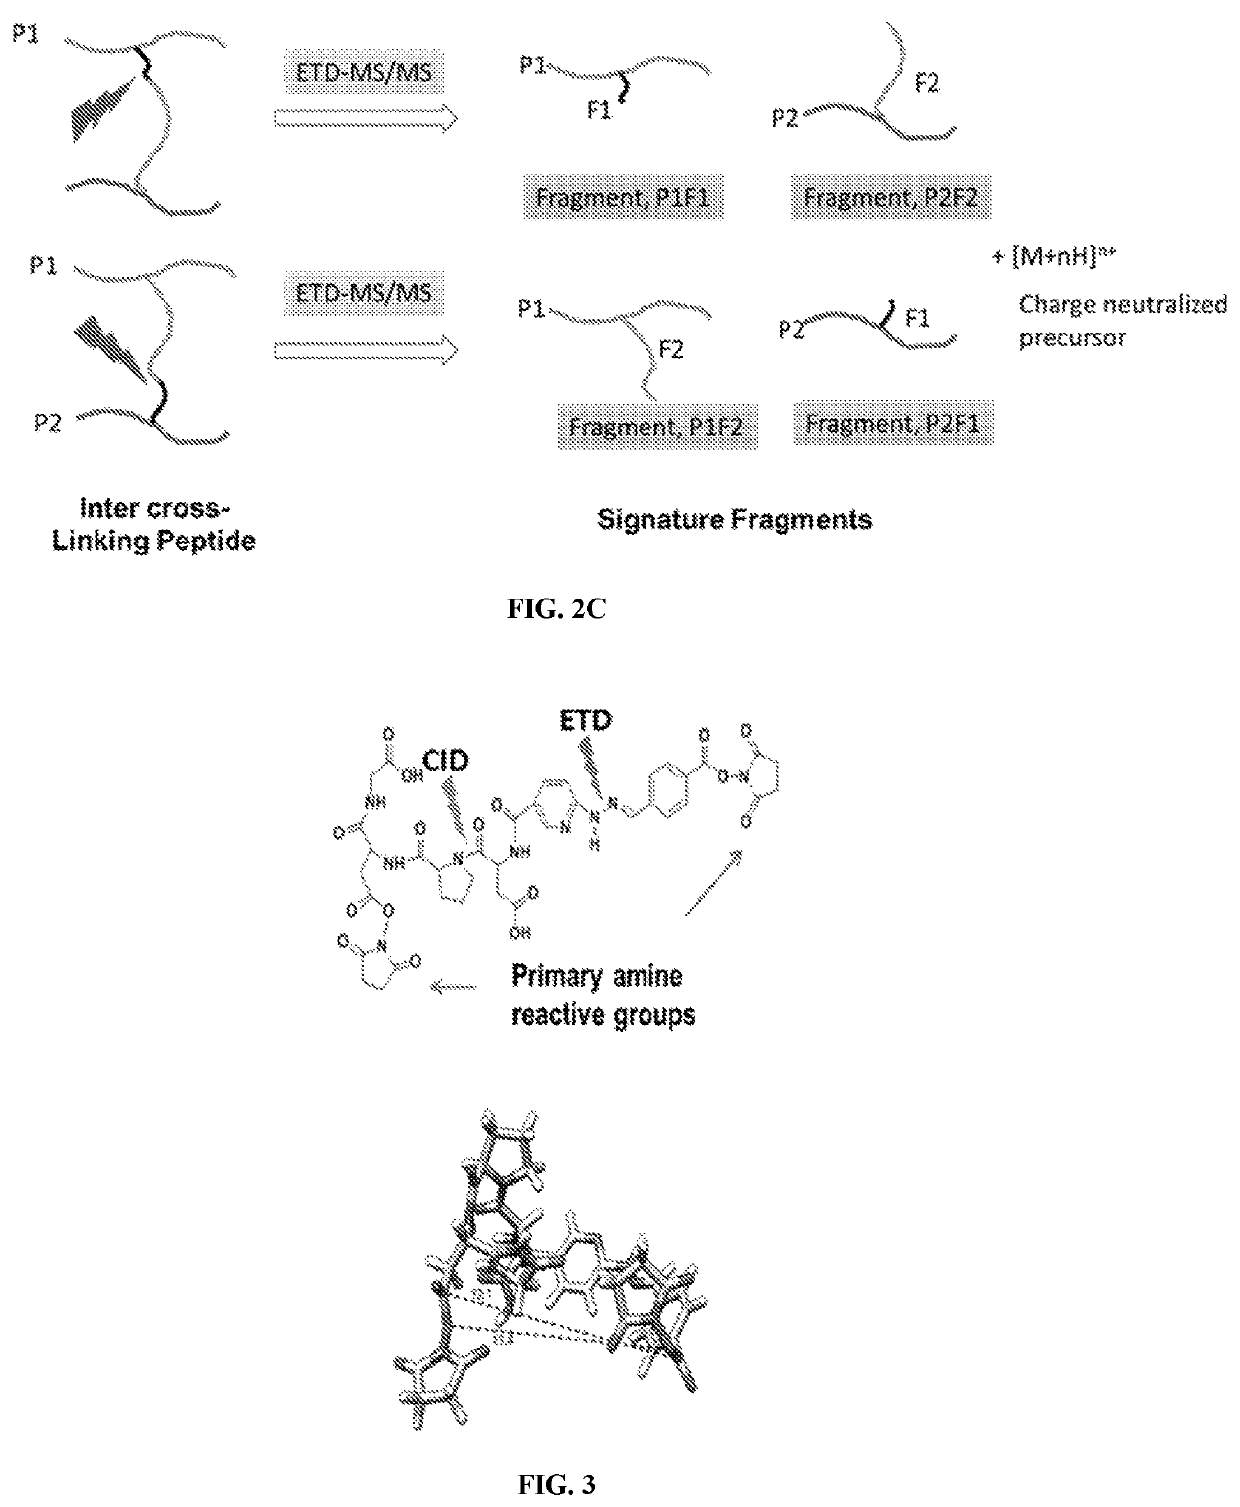 Dual mass spectrometry-cleavable crosslinking reagents for protein-protein interactions